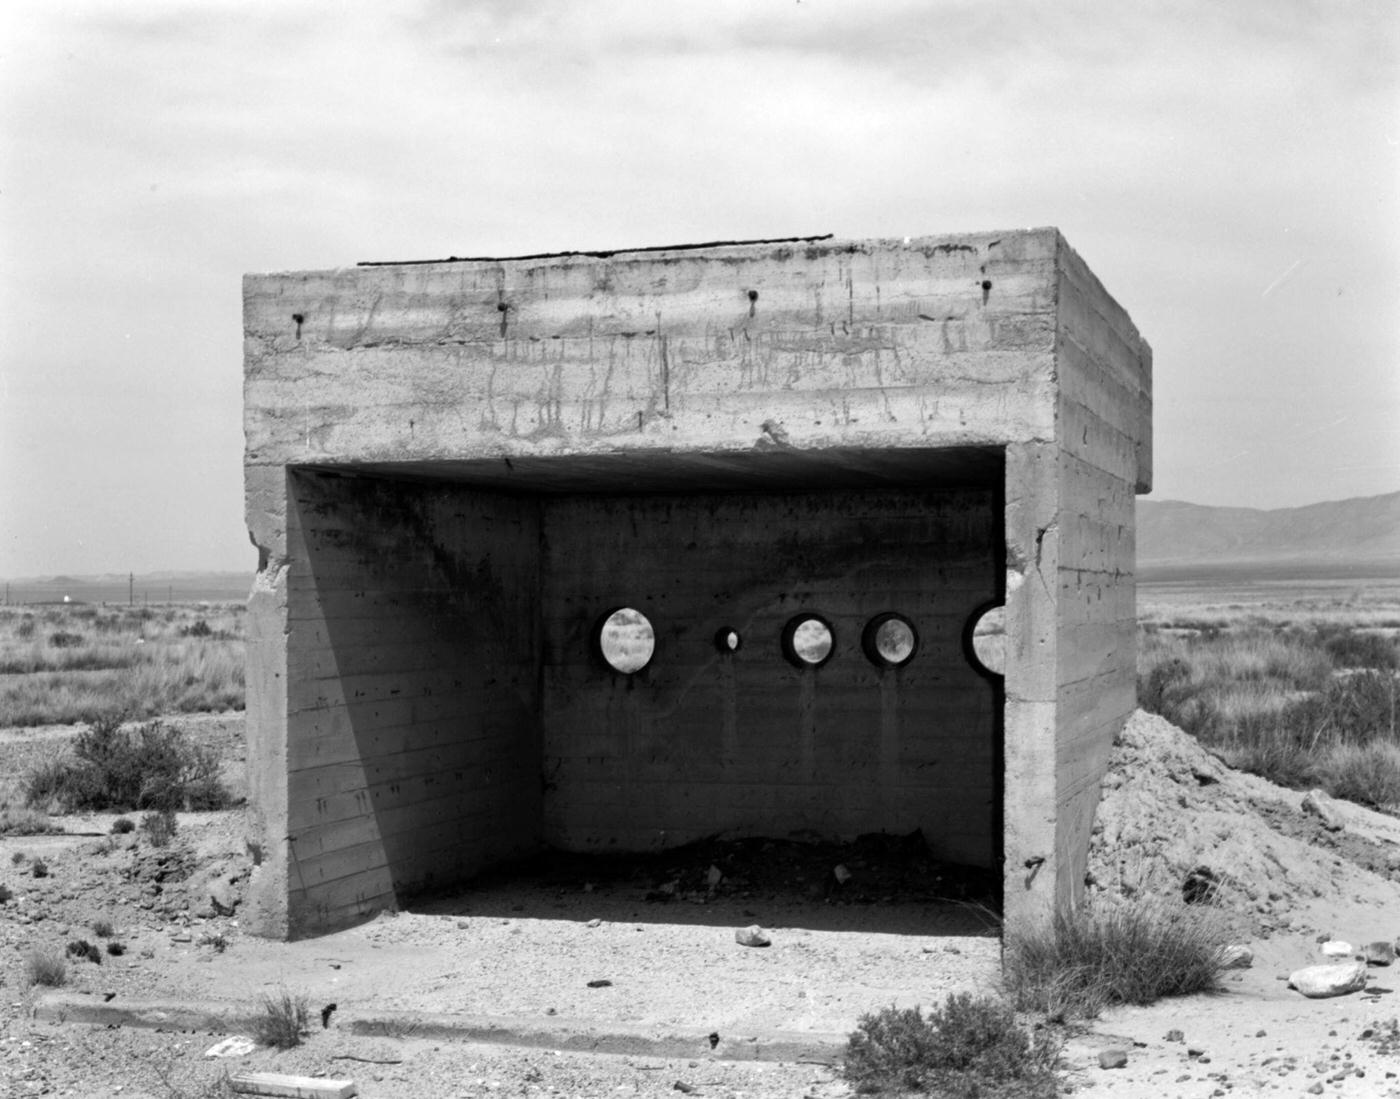 Trinity Site At White Sands Missile Range, Camera bunker, New Mexico, 1968